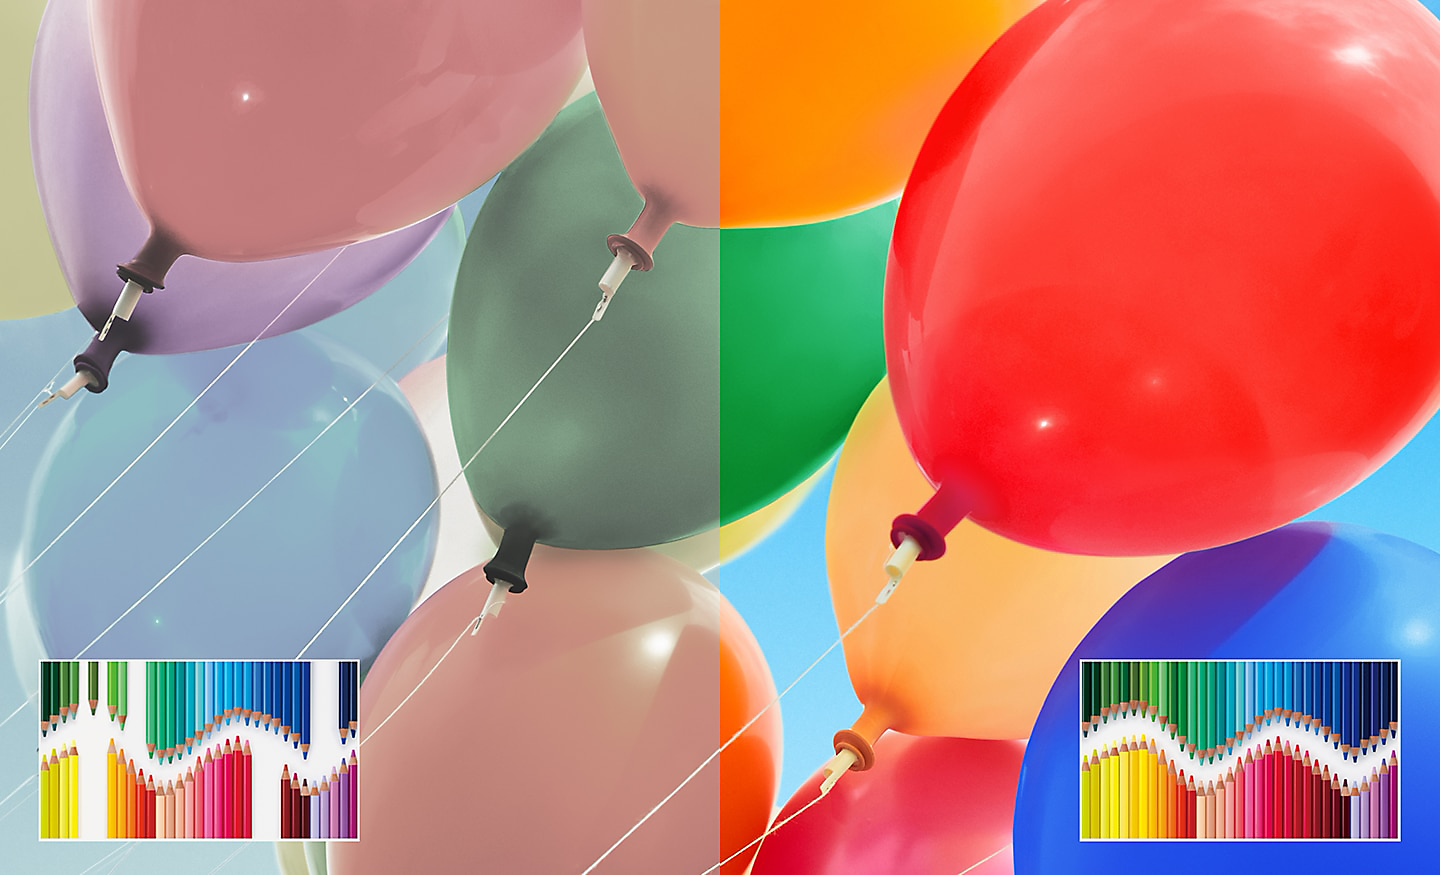 Split screen image of multicoloured balloons showing enhanced brightness and contrast on right side